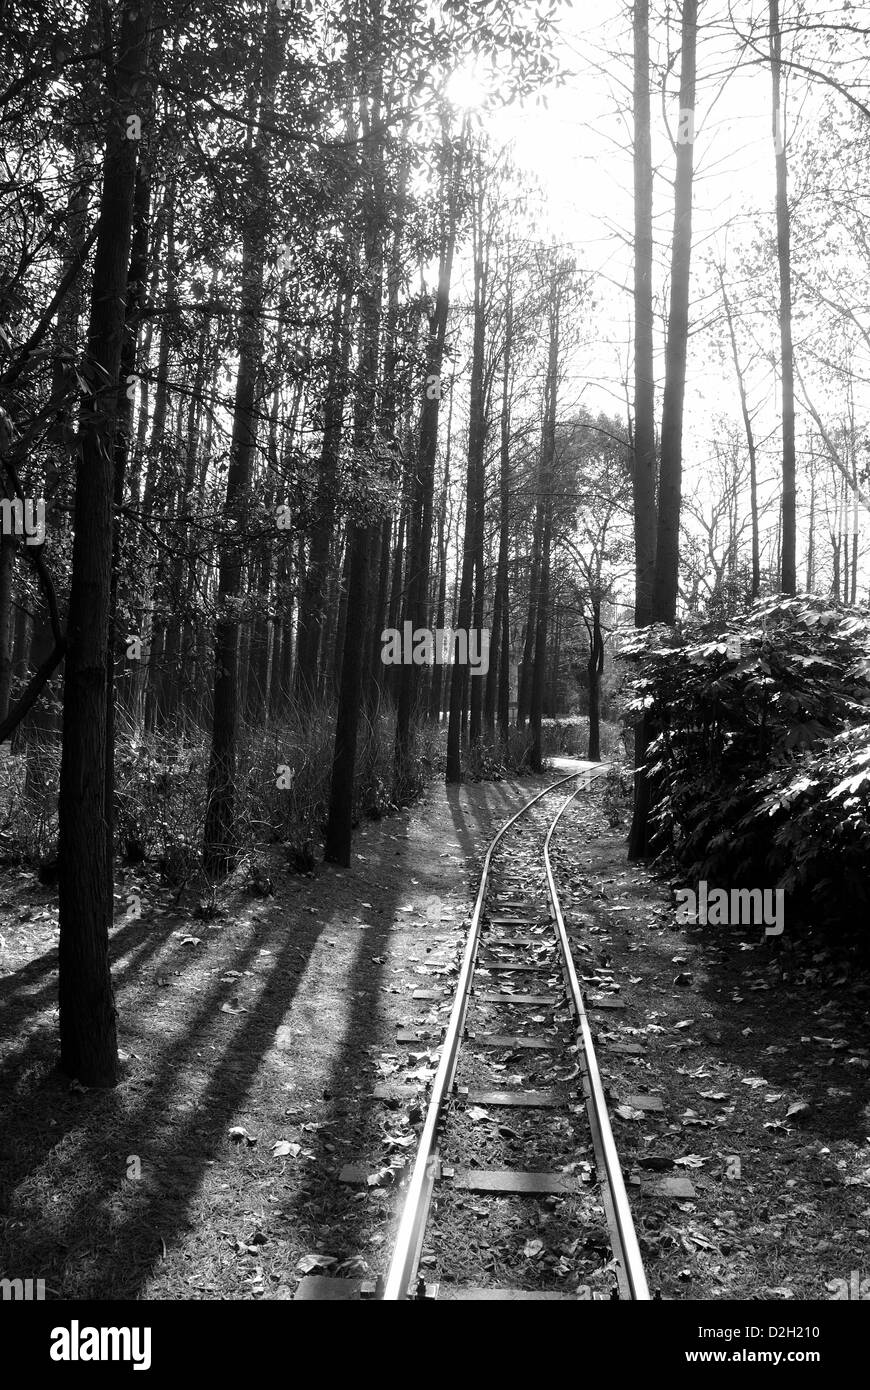 Train railroad passing through the middle of the wood surrounded by tall trees, Shanghai, China Stock Photo